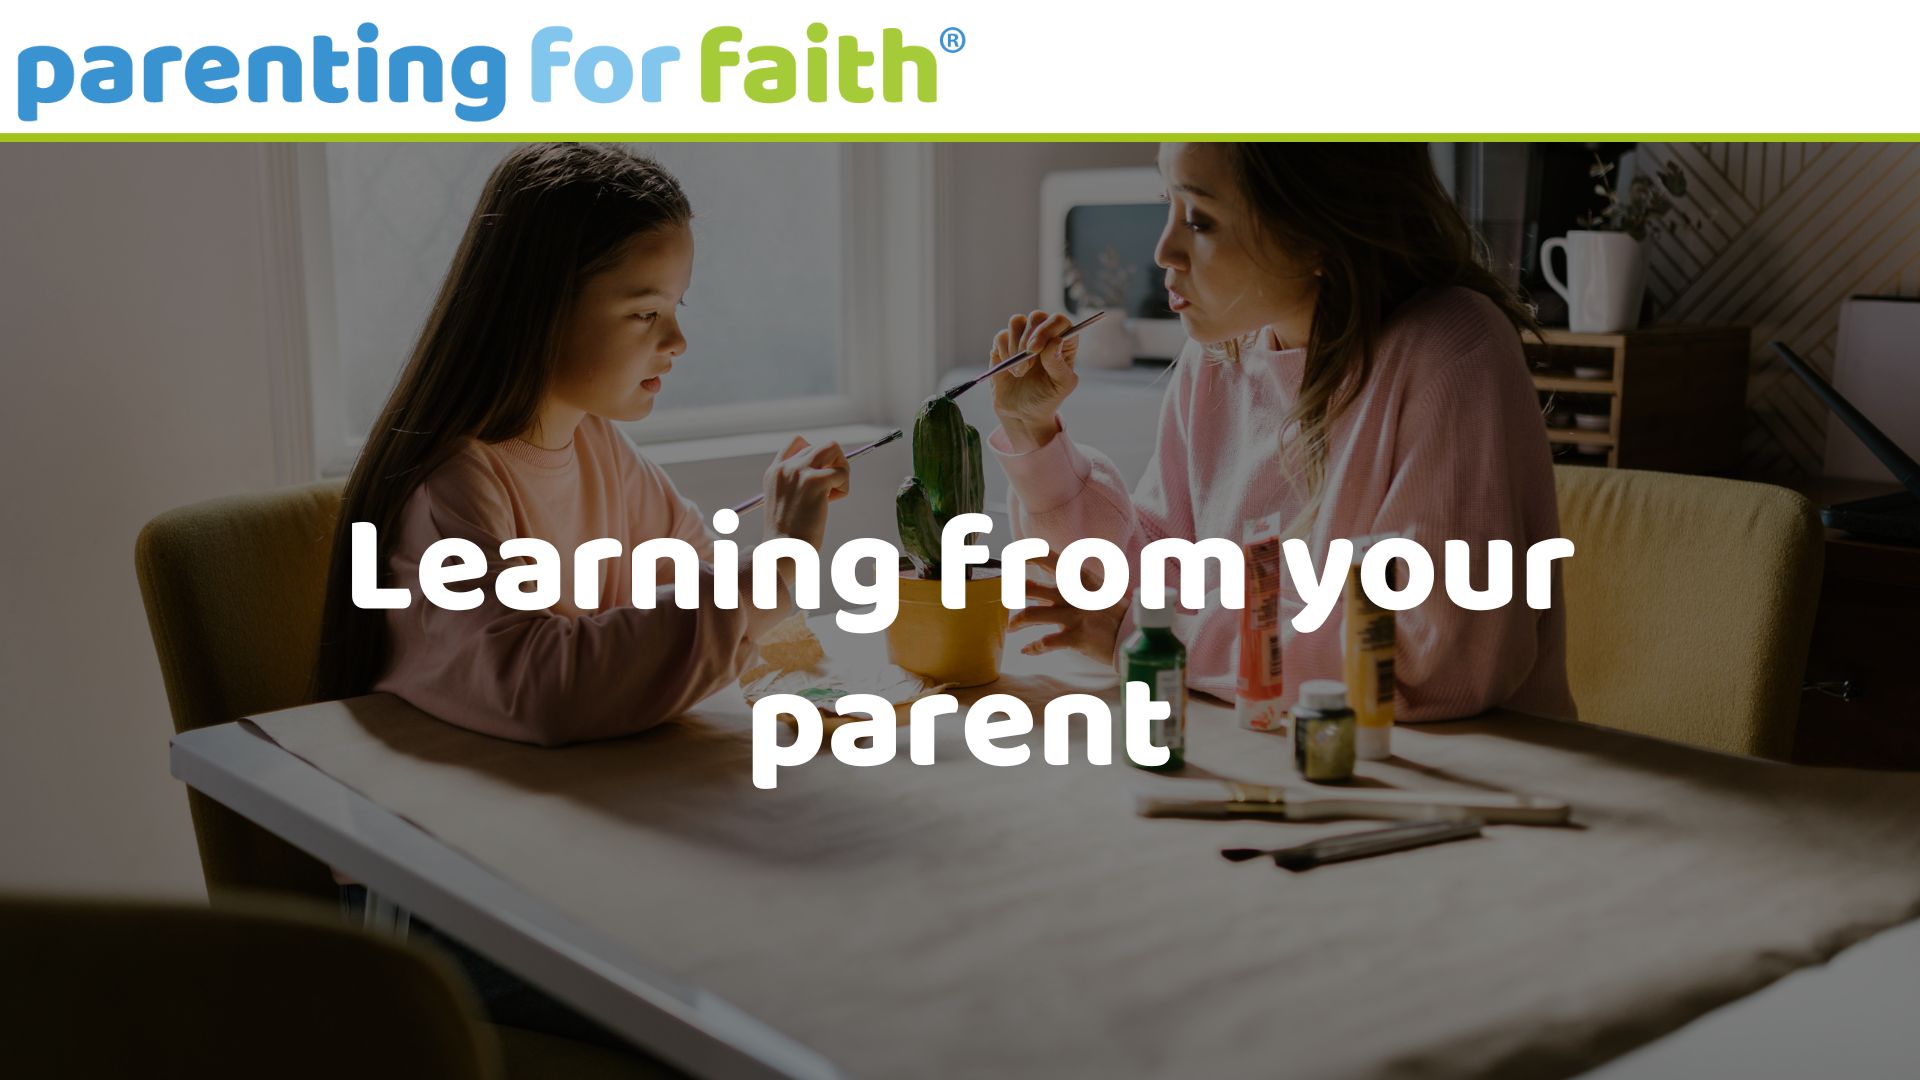 Learning from your parent image credit RDNE Stock project from Pexels